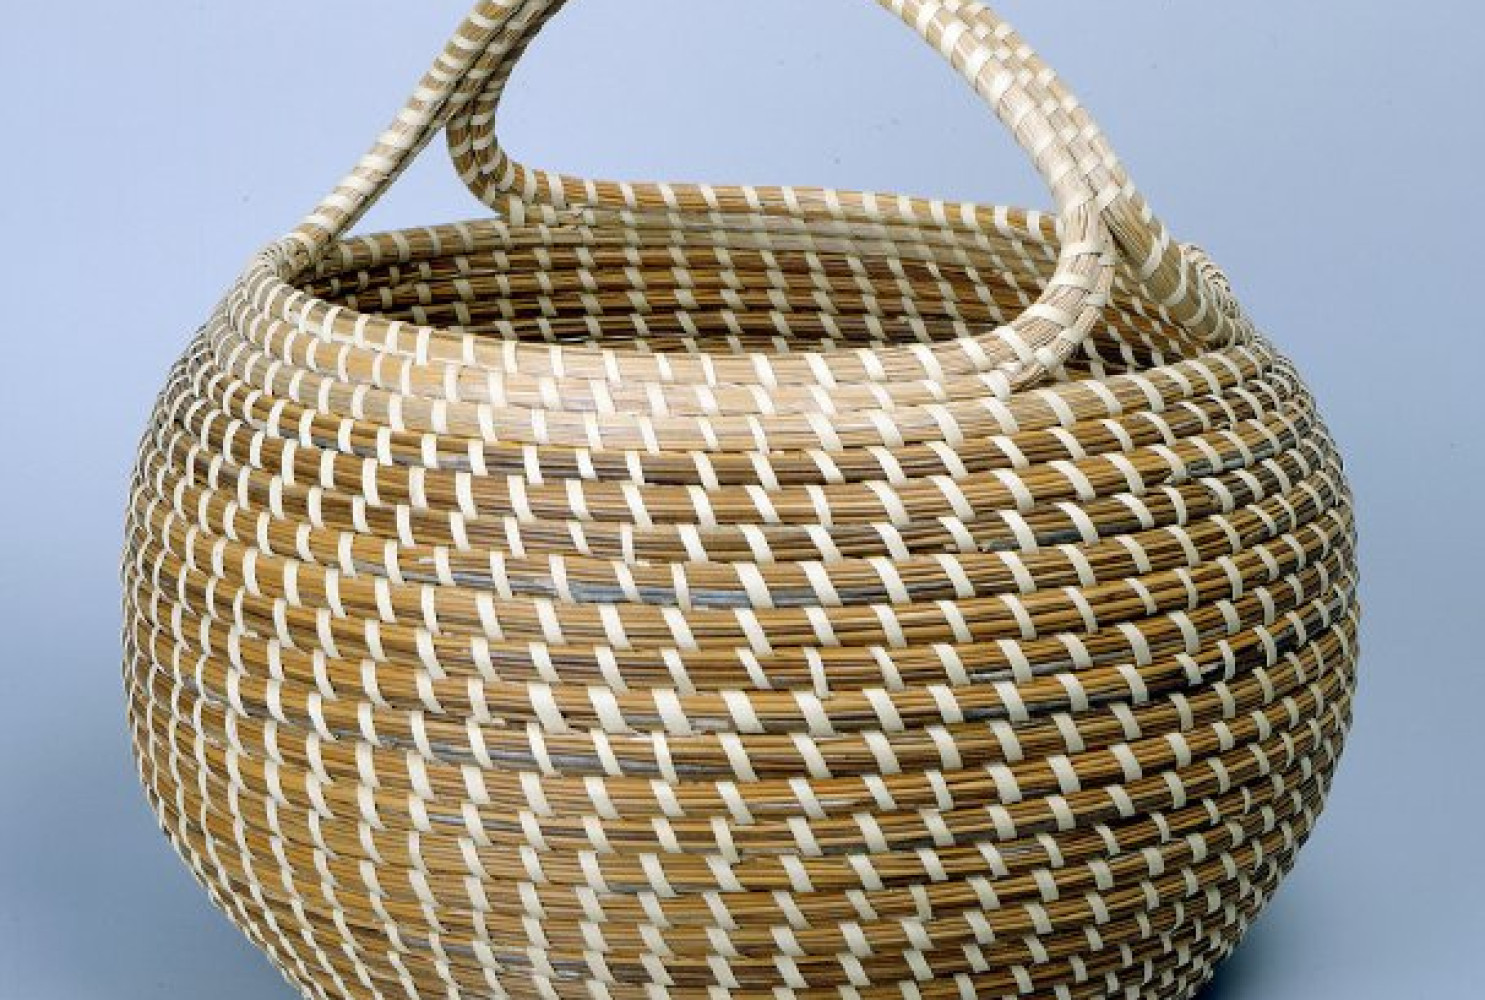 Cobra with Handle, ca. 1980, by Mary Jaskson (American, b. 1945); Sweetgrass, bullrush, palmetto; 15 x 16 in.; Gibbes Museum of Art, Museum Purchase with funds donated by Mr. Robert Marks (1984.026)